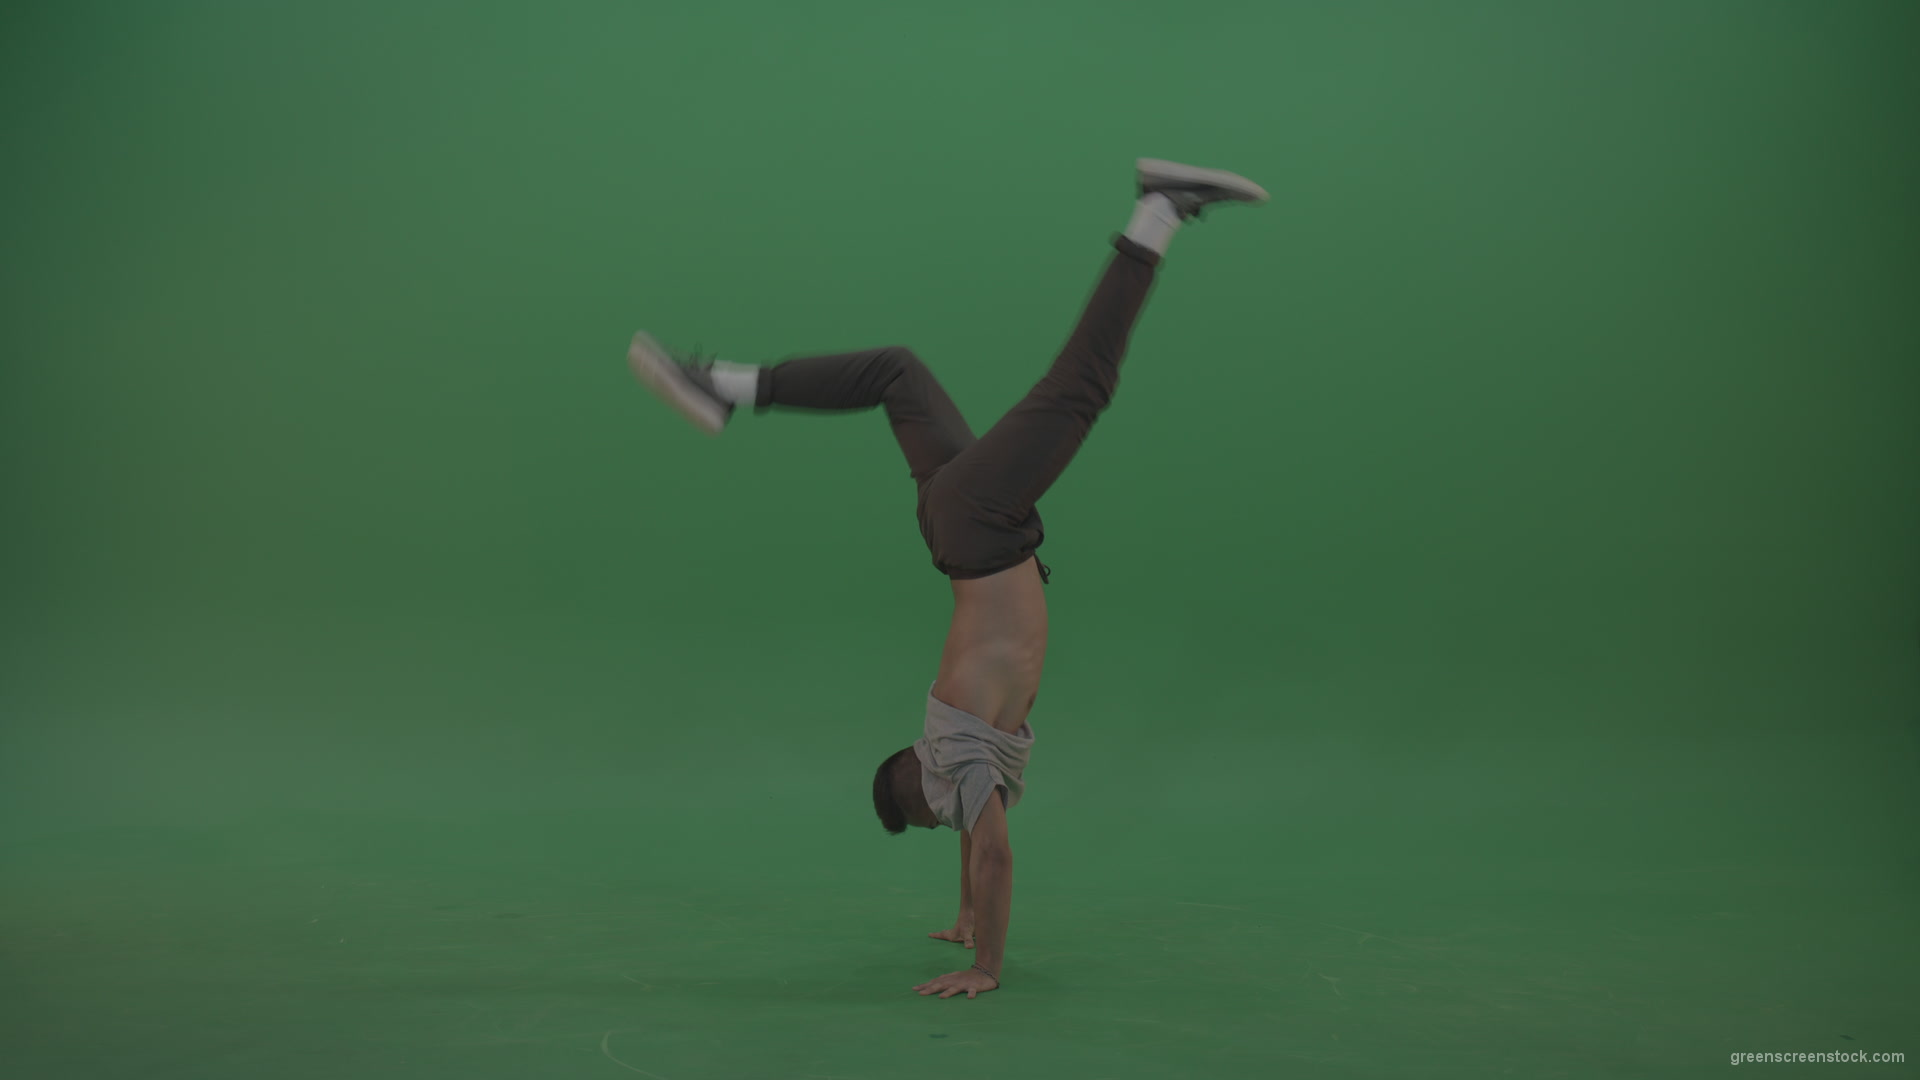 Man-dancing-and-staying-on-hand-on-the-green-floor-green-screen_006 Green Screen Stock